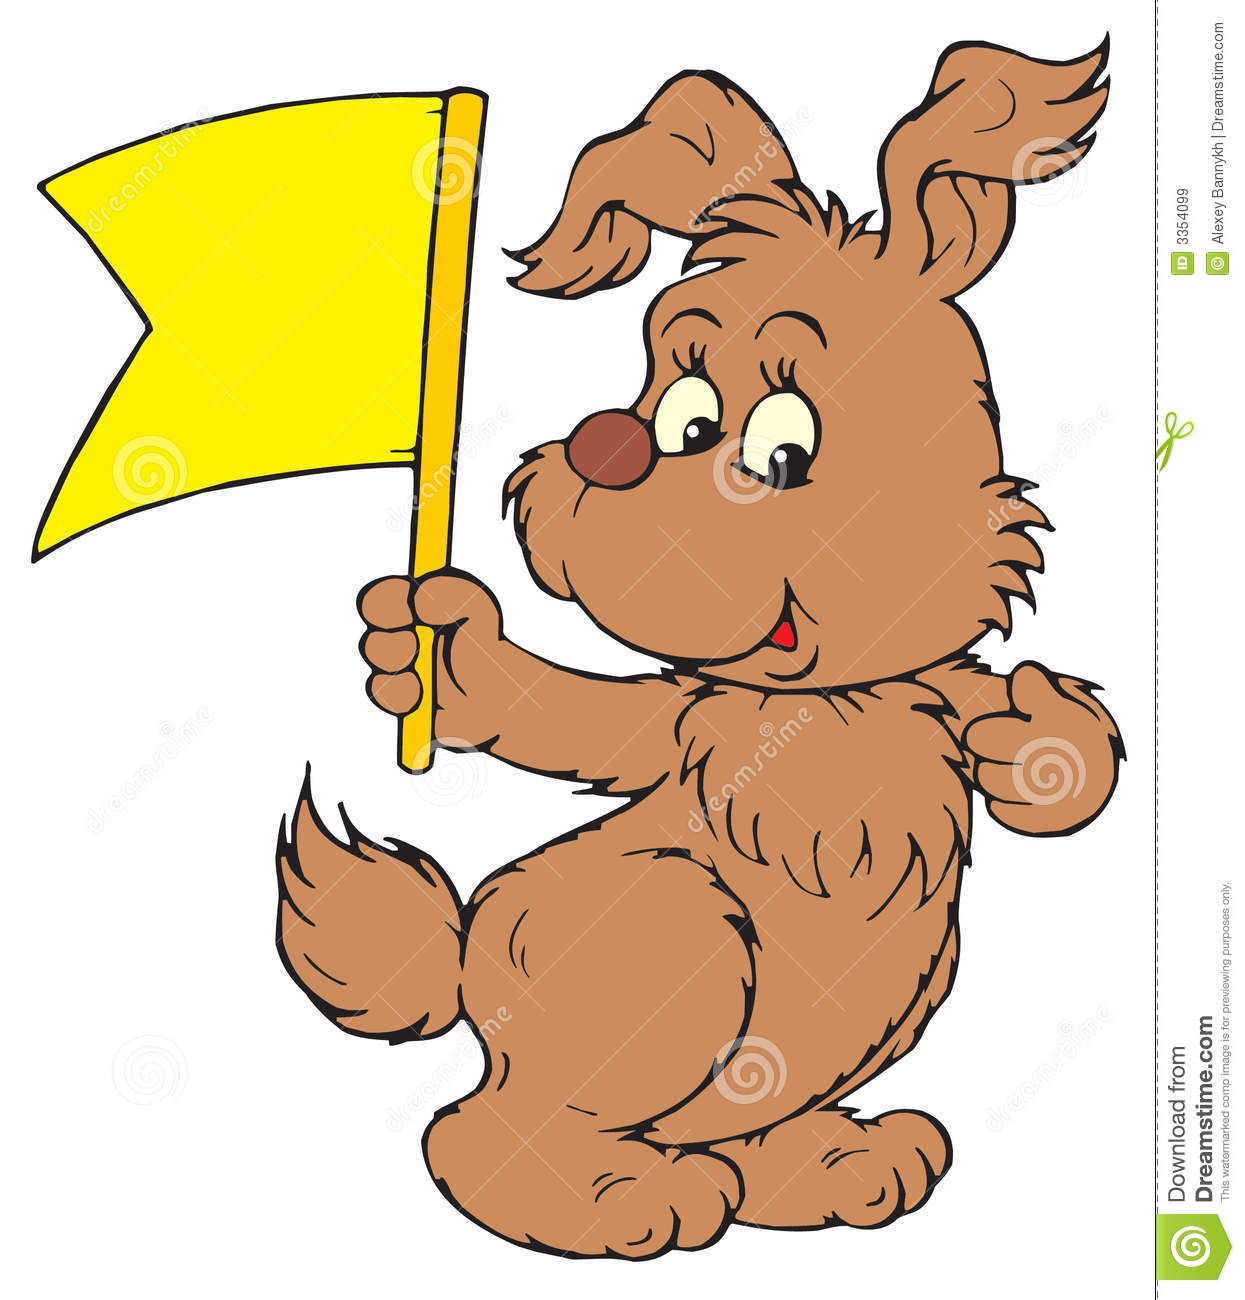 Brown Dog  Vector Clip Art  Royalty Free Stock Images   Image  3354099